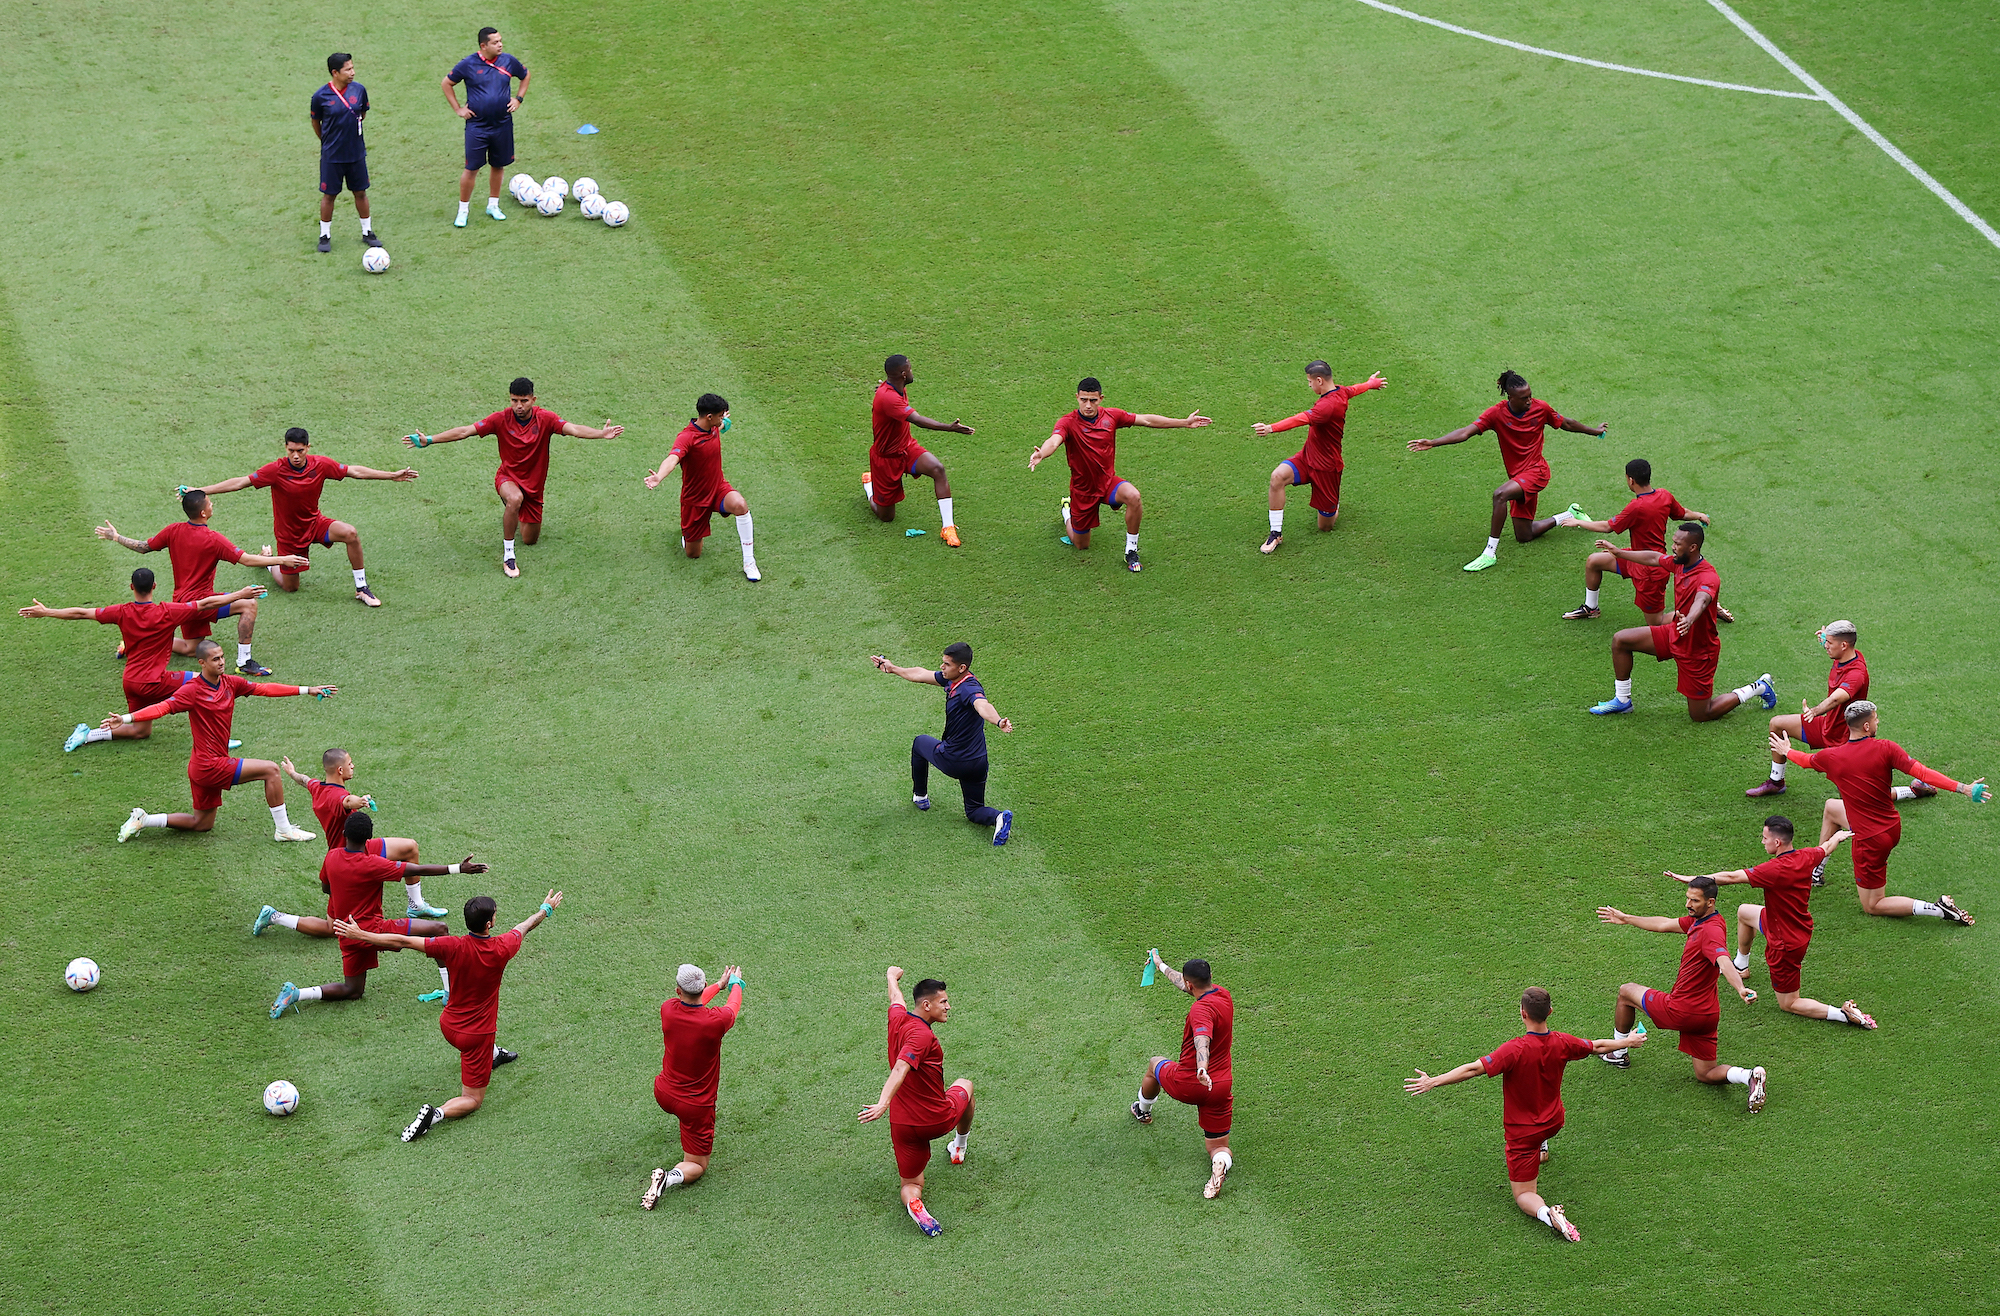 Costa Rican players warm up prior to a match against Japan at Ahmad Bin Ali Stadium on Sunday.